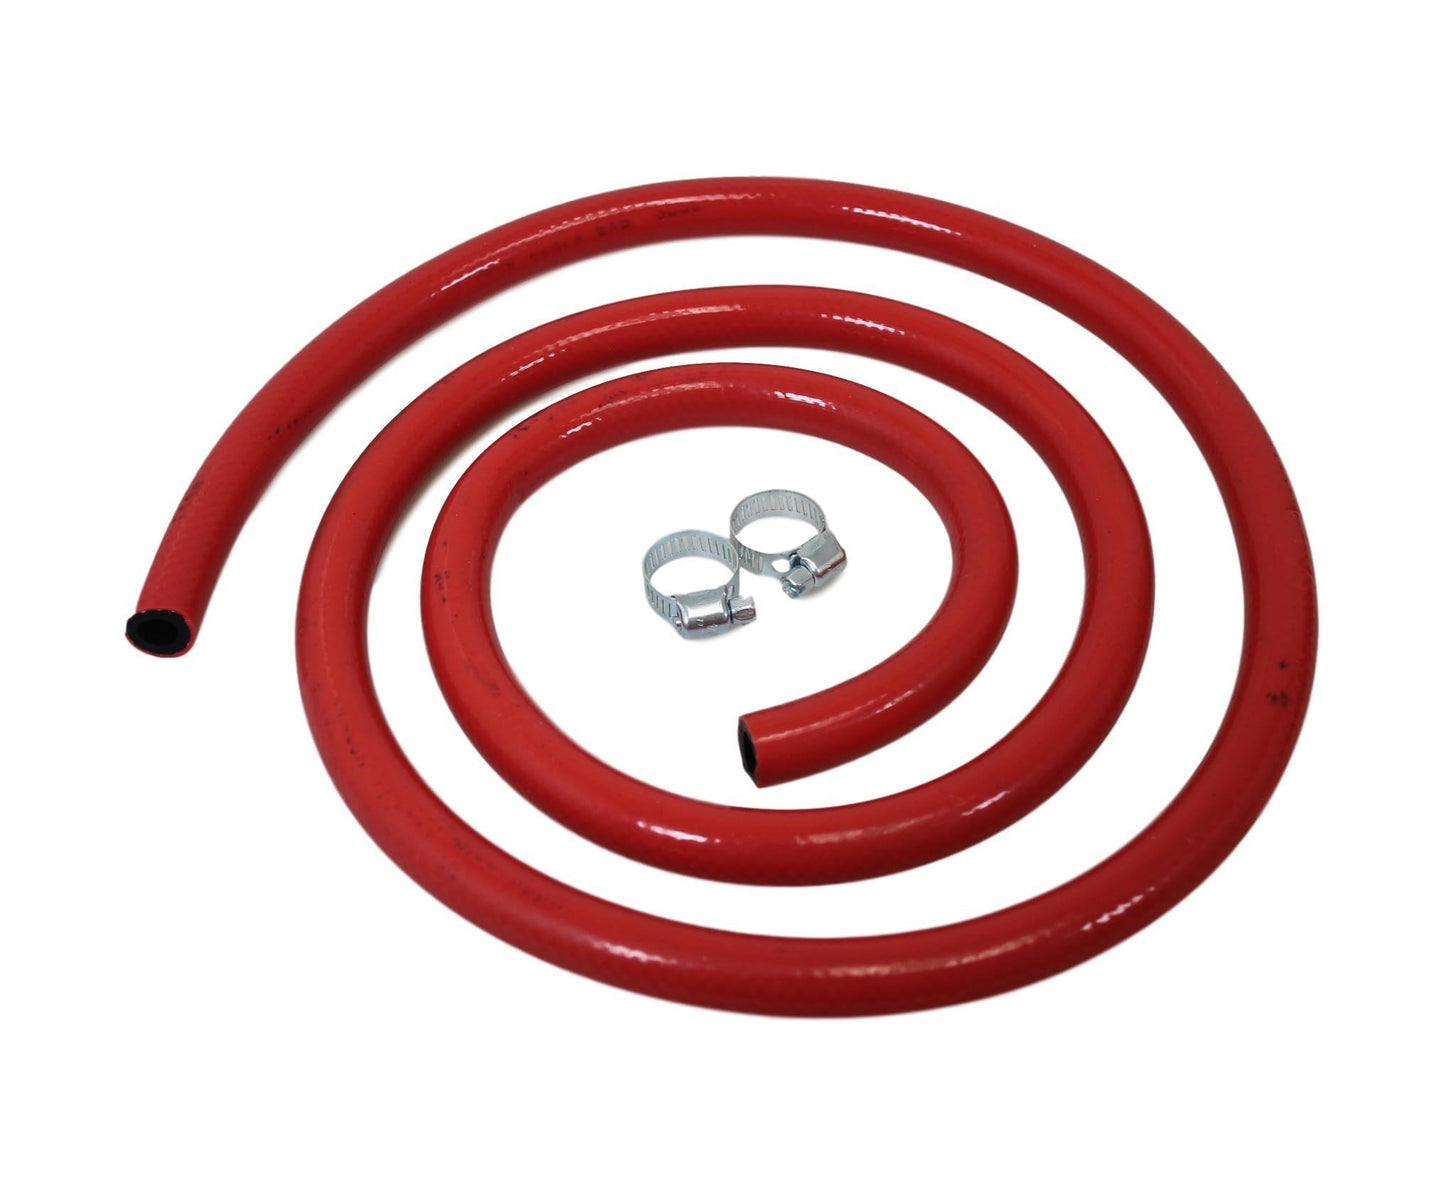 Atlas Gas Red Gas Hose Approved High Quality Gas Hose Red 1.5m 6068 A  (Parcel Rate)